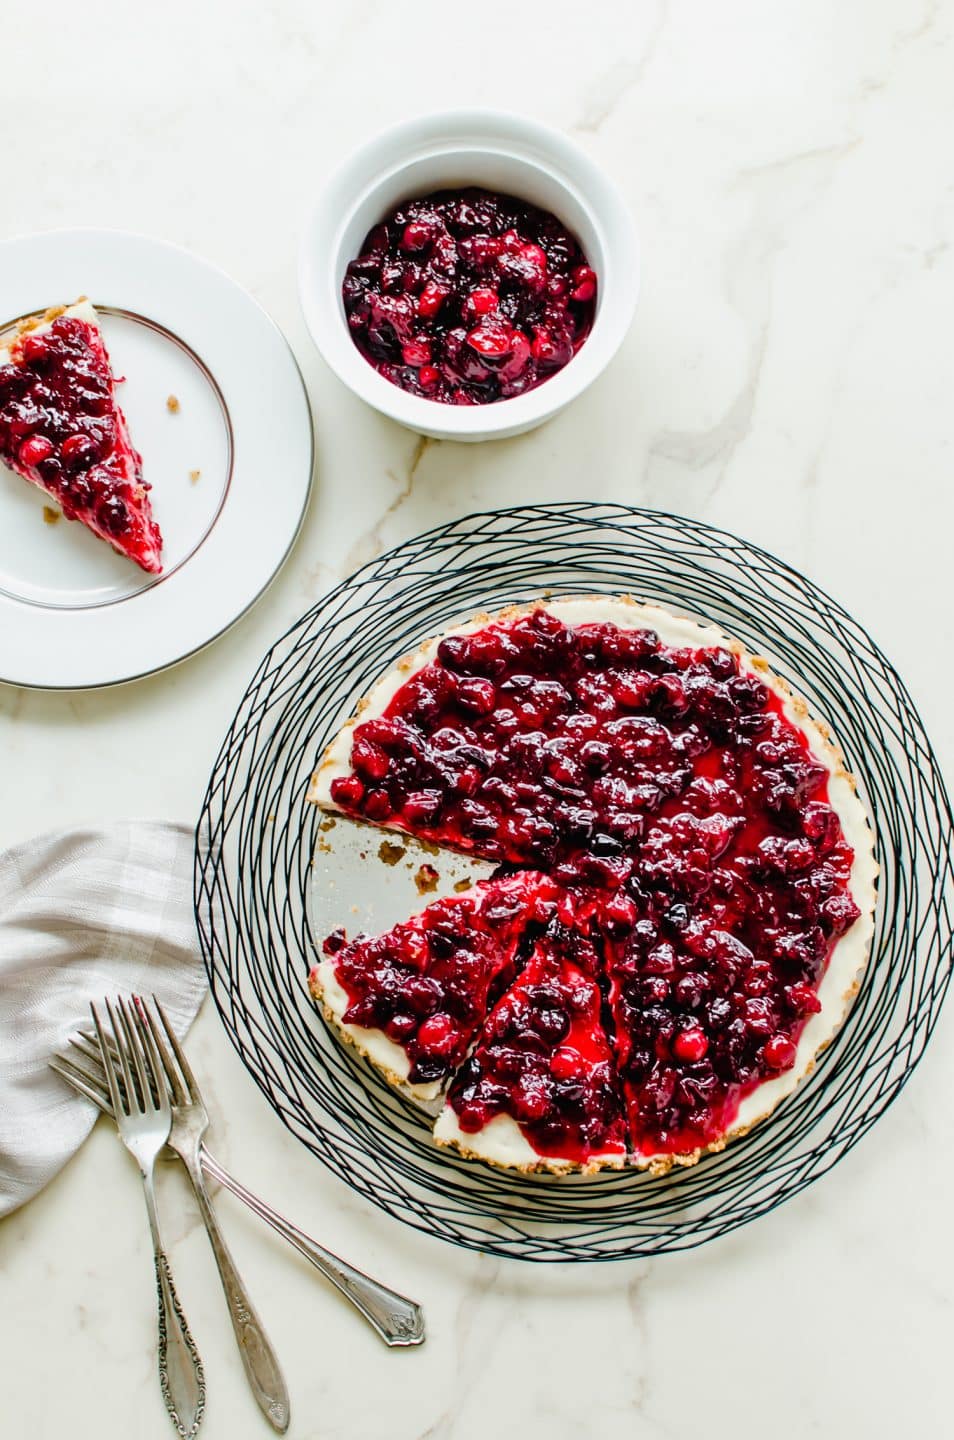 A cranberry cheesecake tart on a wire charger with a slice of tart on a plate to the side.